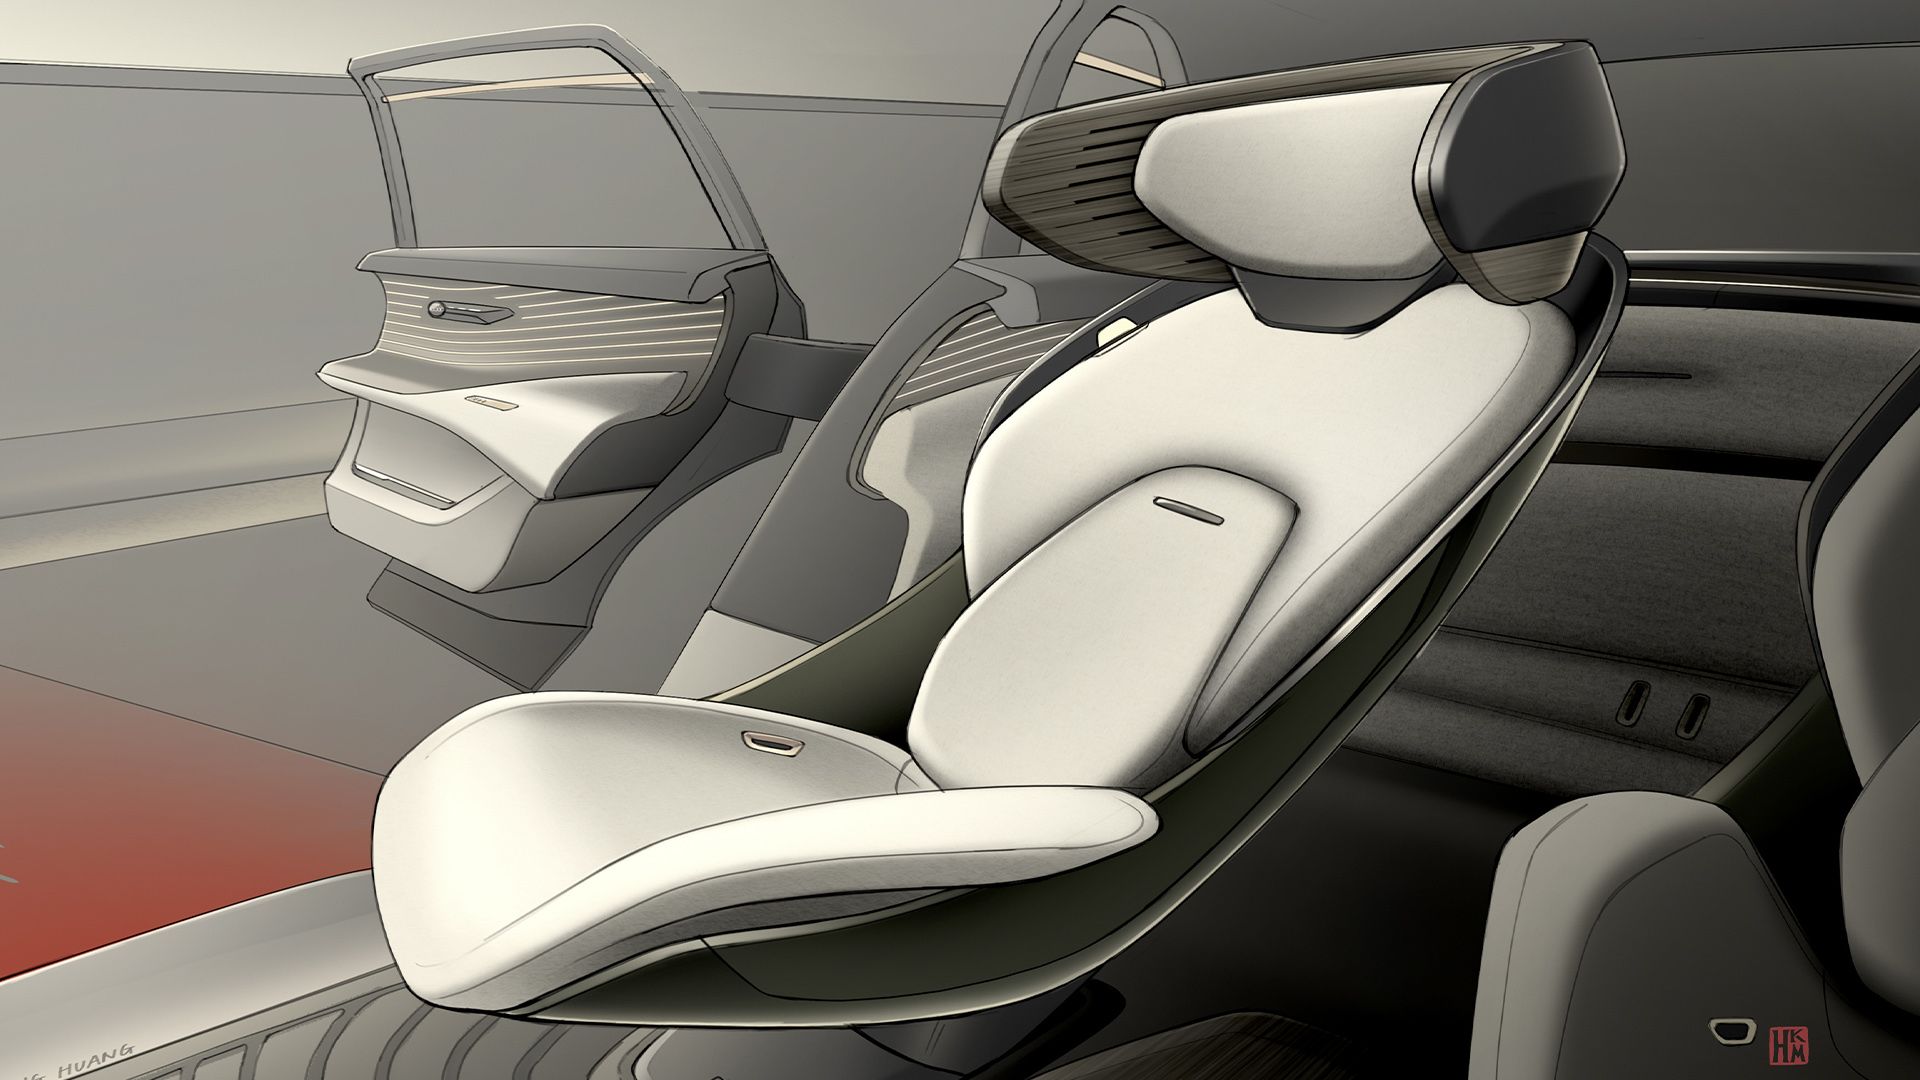 A sketch depicts a car seat turned towards an open door.